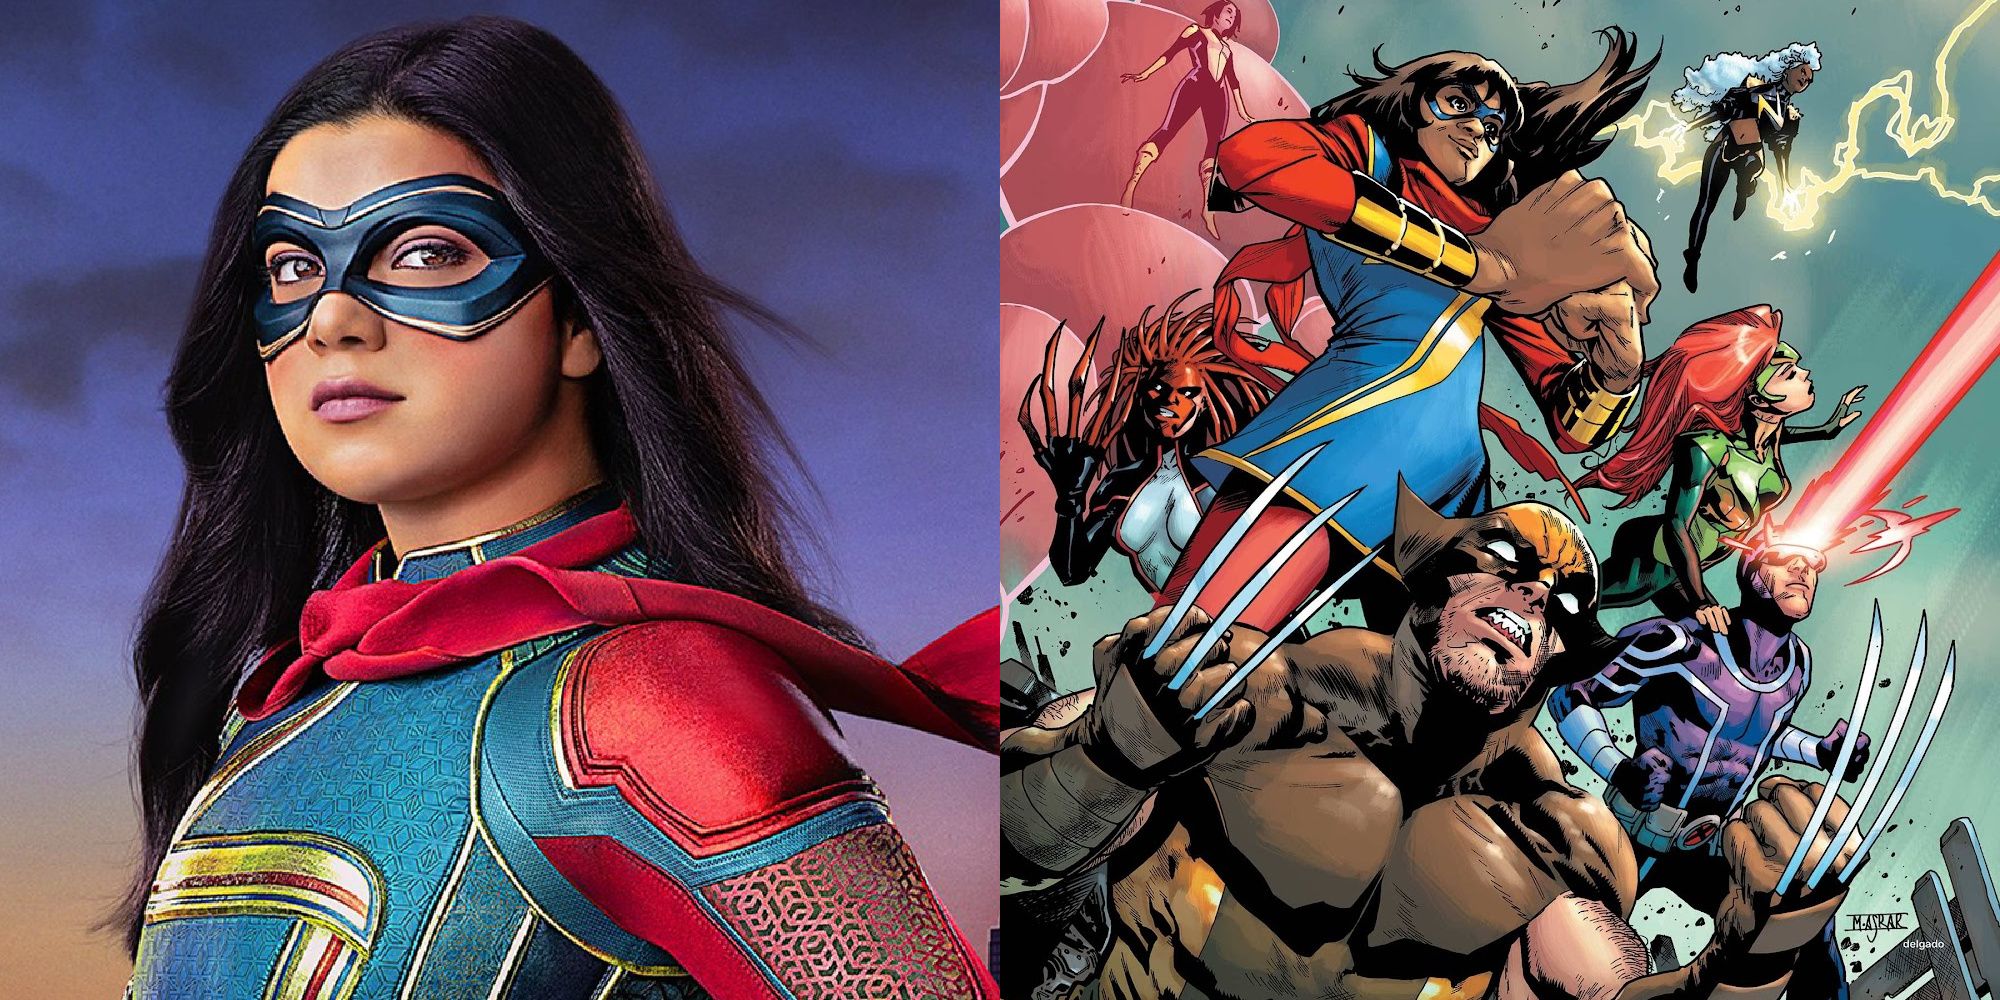 Split image of Ms. Marvel from MCU and Ms. Marvel teaming up with the X-Men in Marvel Comics.